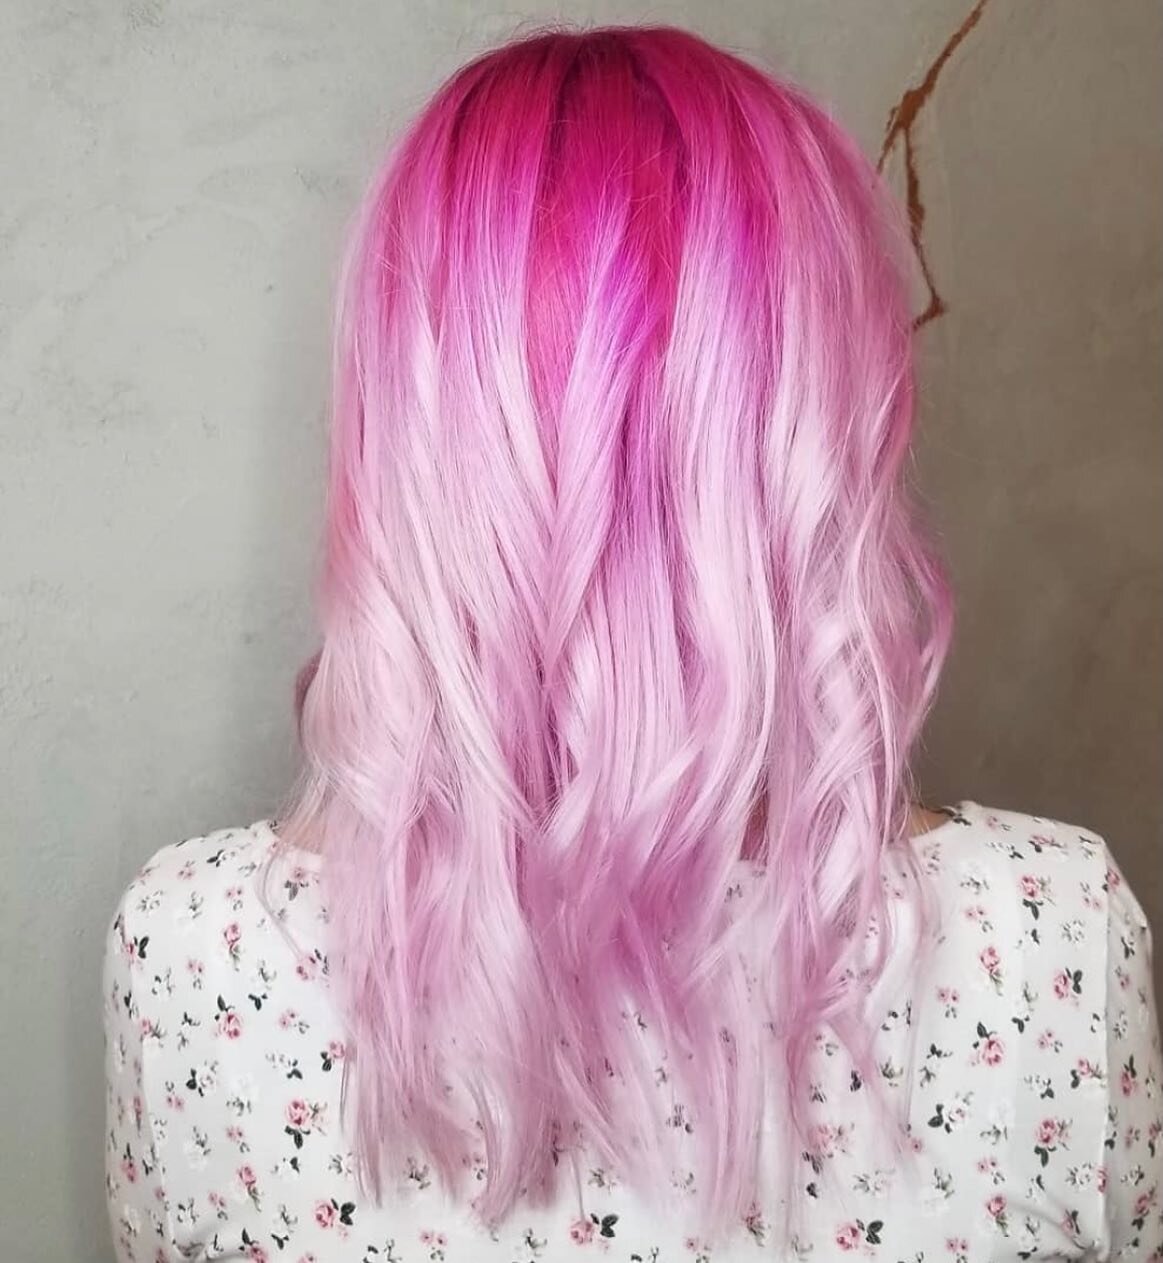 Ending Summer with more Pink Hair Inspo! 🌸 this root melted pink done by @peaceloveha1r! 
&bull;
#pinkhair #rootmelt #pinkroots #colormelt #knoxvillehairstylist #knoxvillehair #downtownknoxville